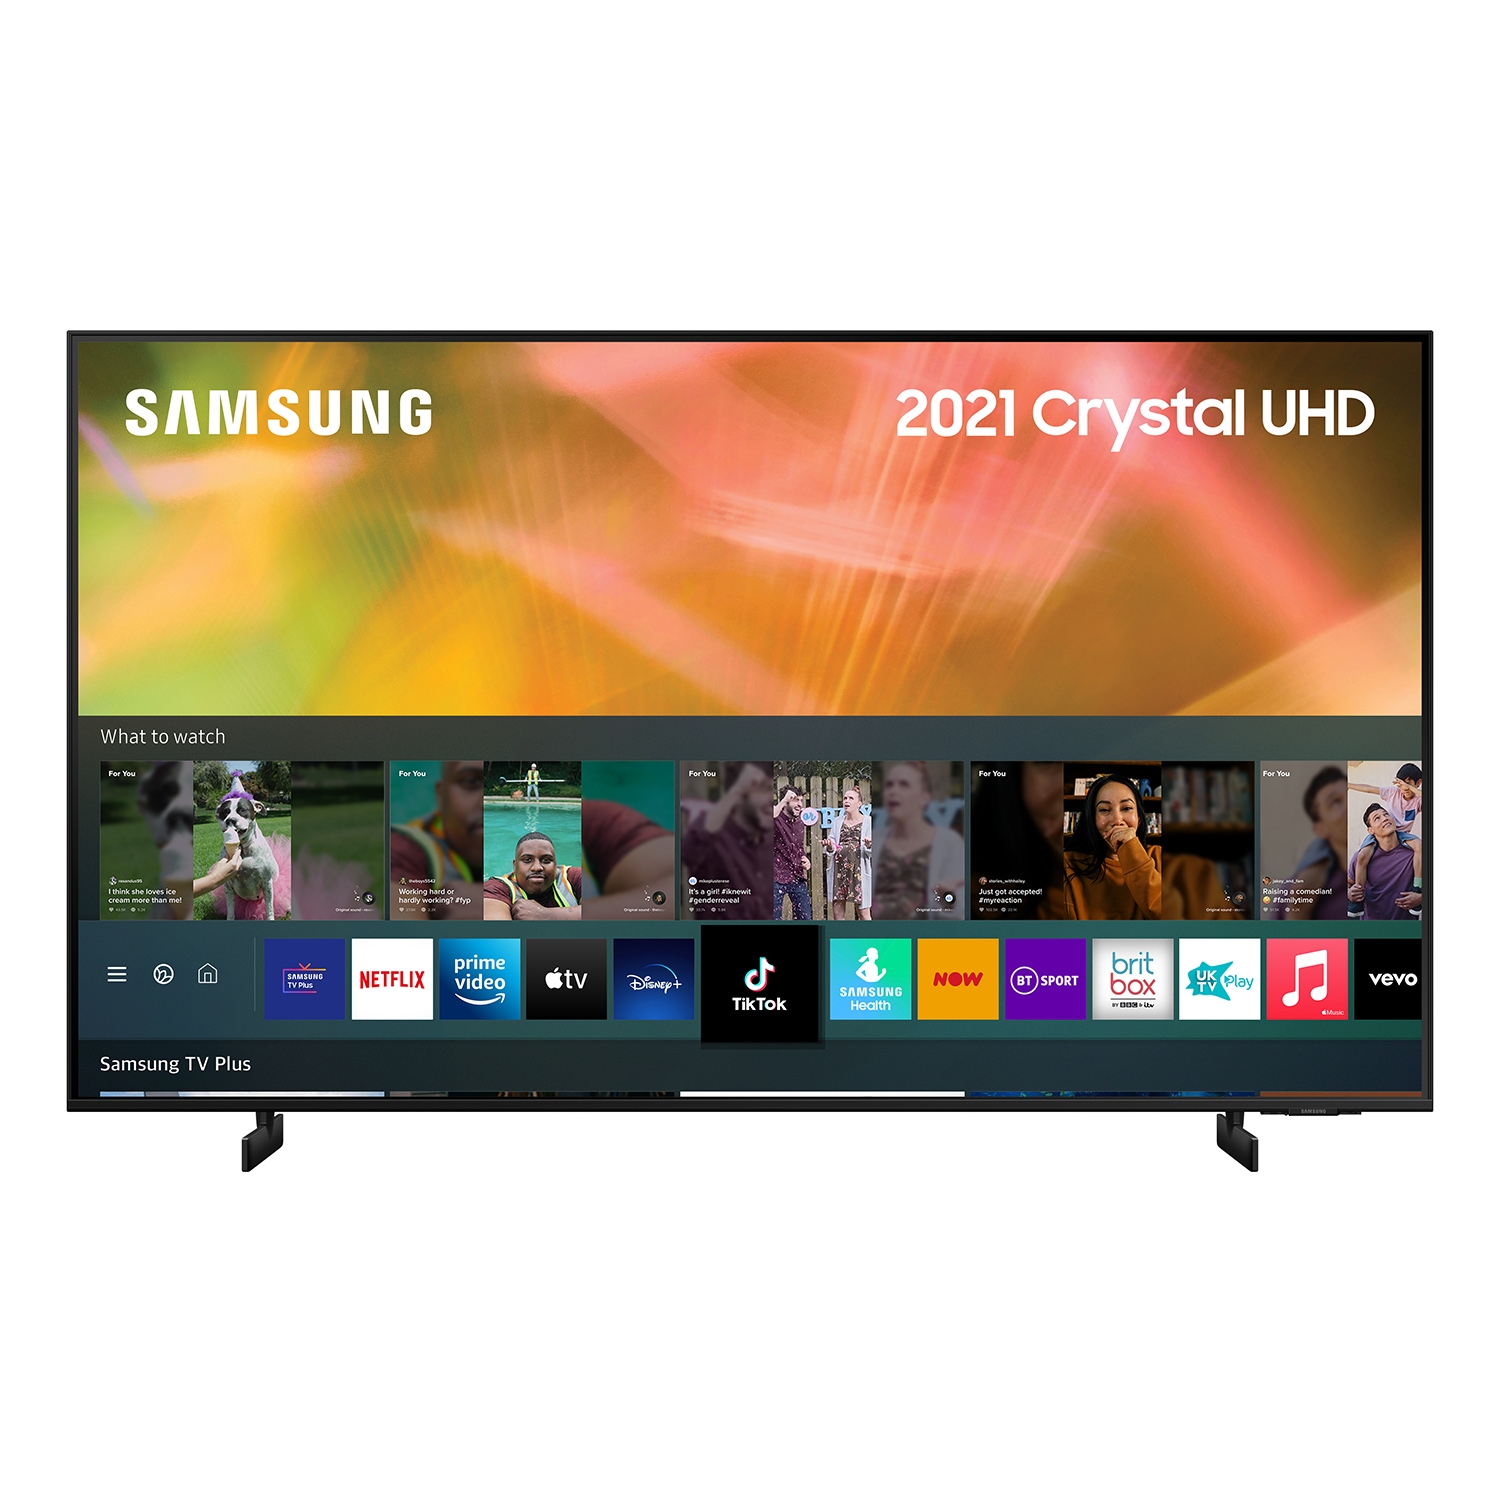 Samsung UE65AU8000KXXU 65" 4K UHD HDR Smart TV HDR powered by HDR10+ with Dynamic Crystal Colour and Air Slim Design - 0